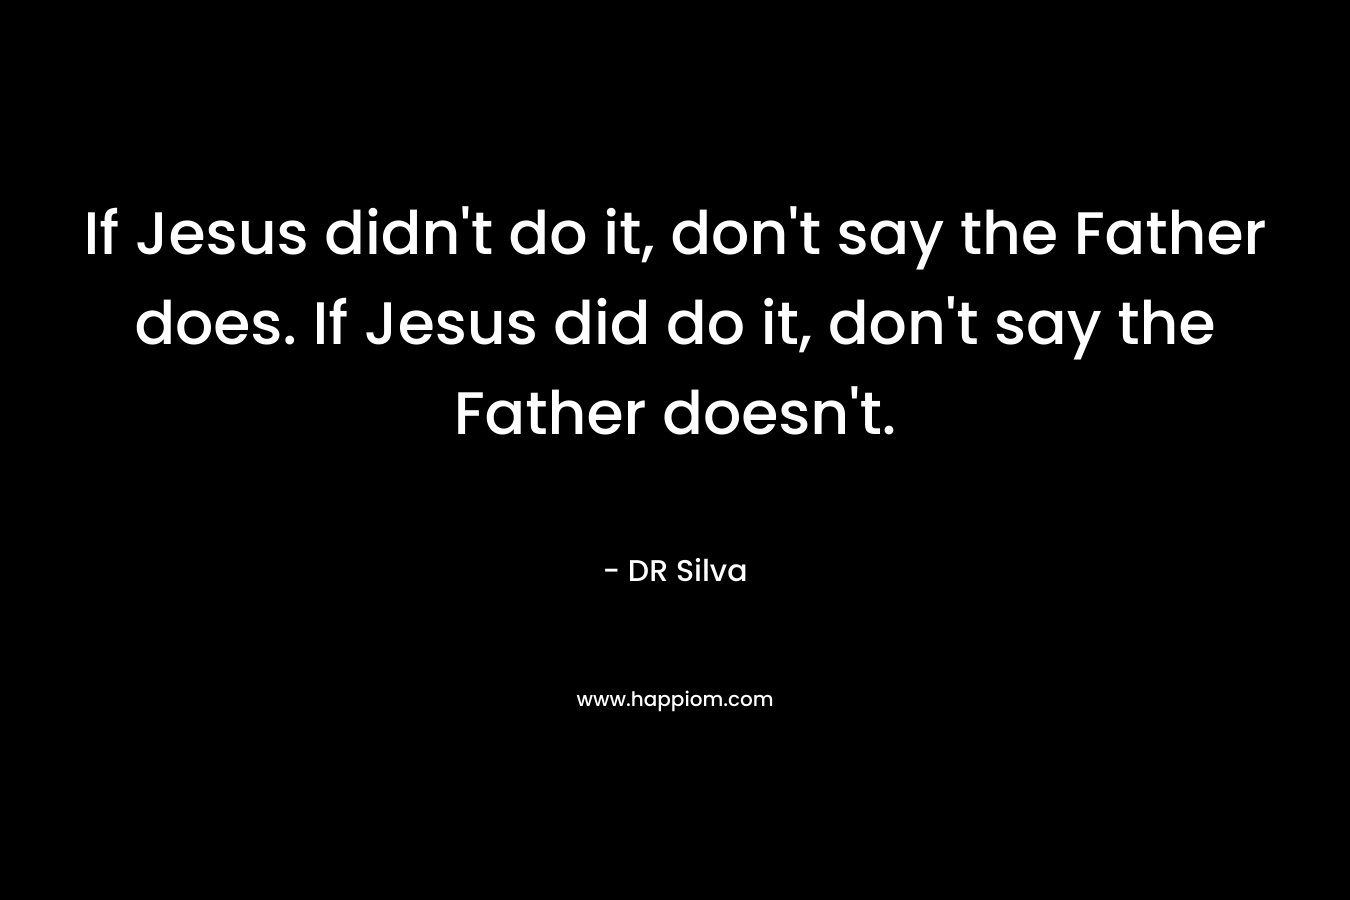 If Jesus didn’t do it, don’t say the Father does. If Jesus did do it, don’t say the Father doesn’t. – DR Silva